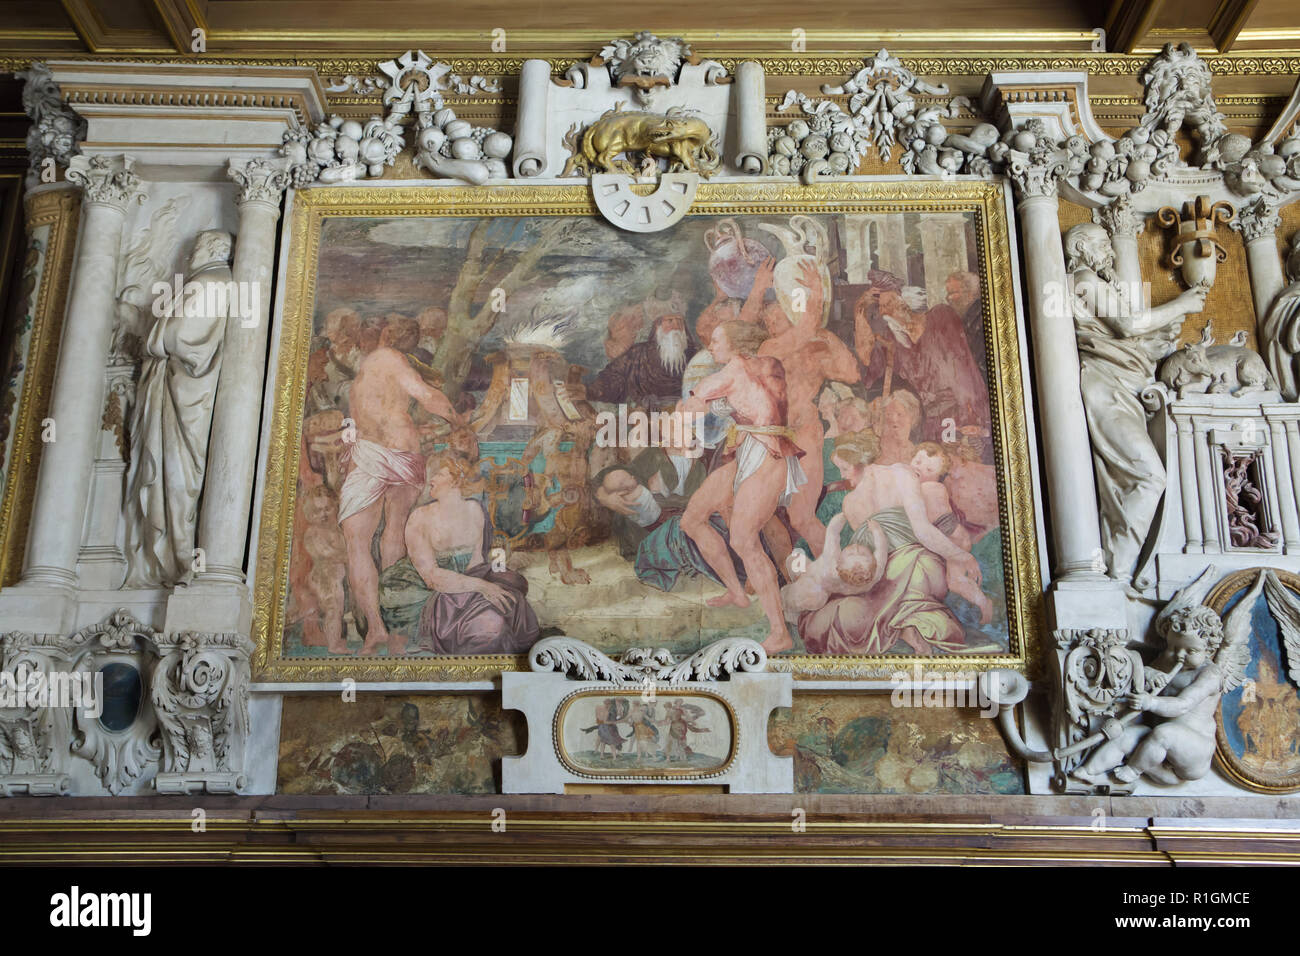 The Gallery of Francis I at Fontainebleau (and French Mannerism)